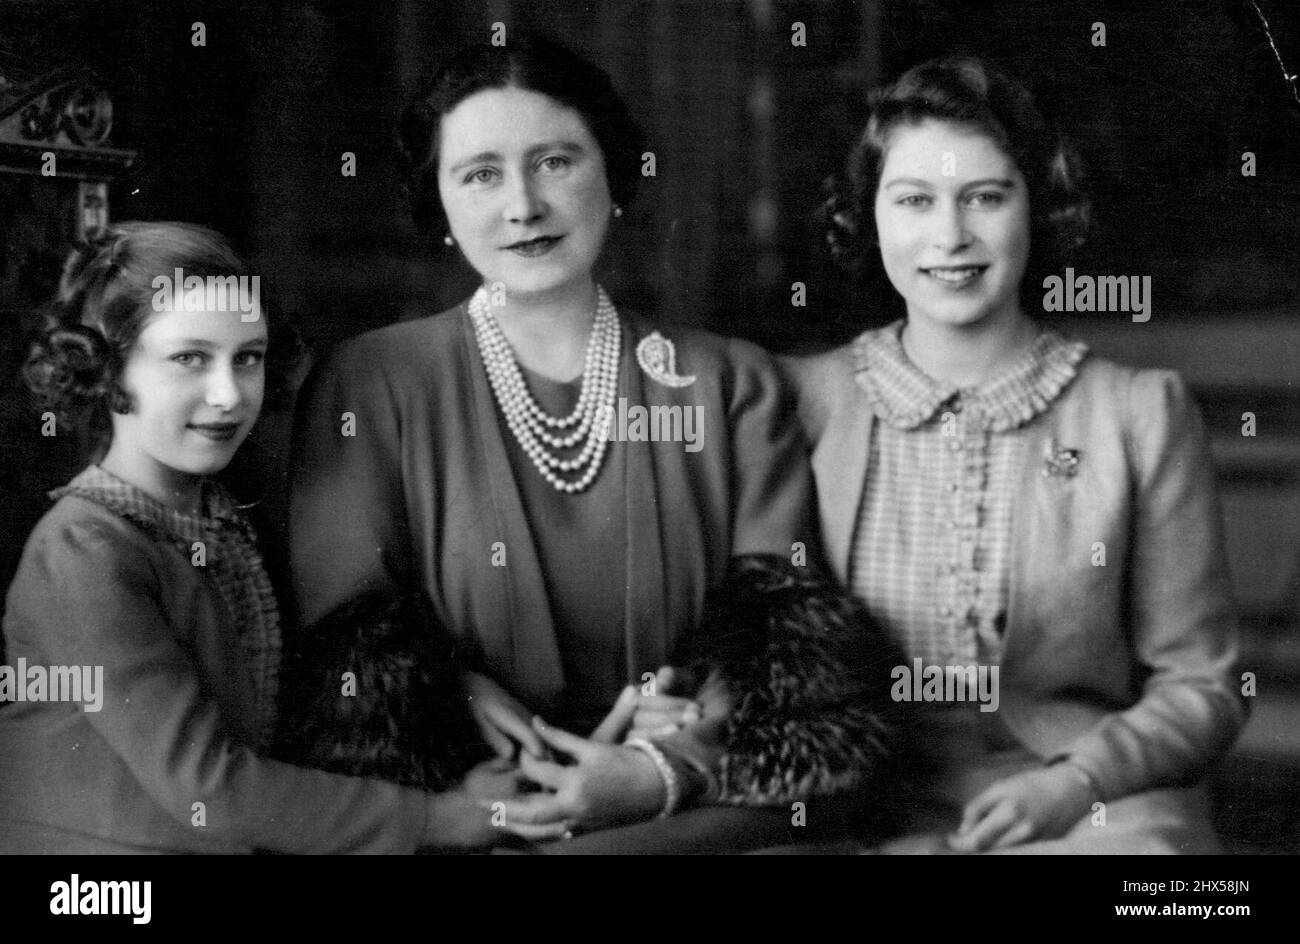 New Portrait -- Queen and Princesses Elizabeth and Margaret Rose. May 01, 1941. (Photo by Marcus Adams). Stock Photo